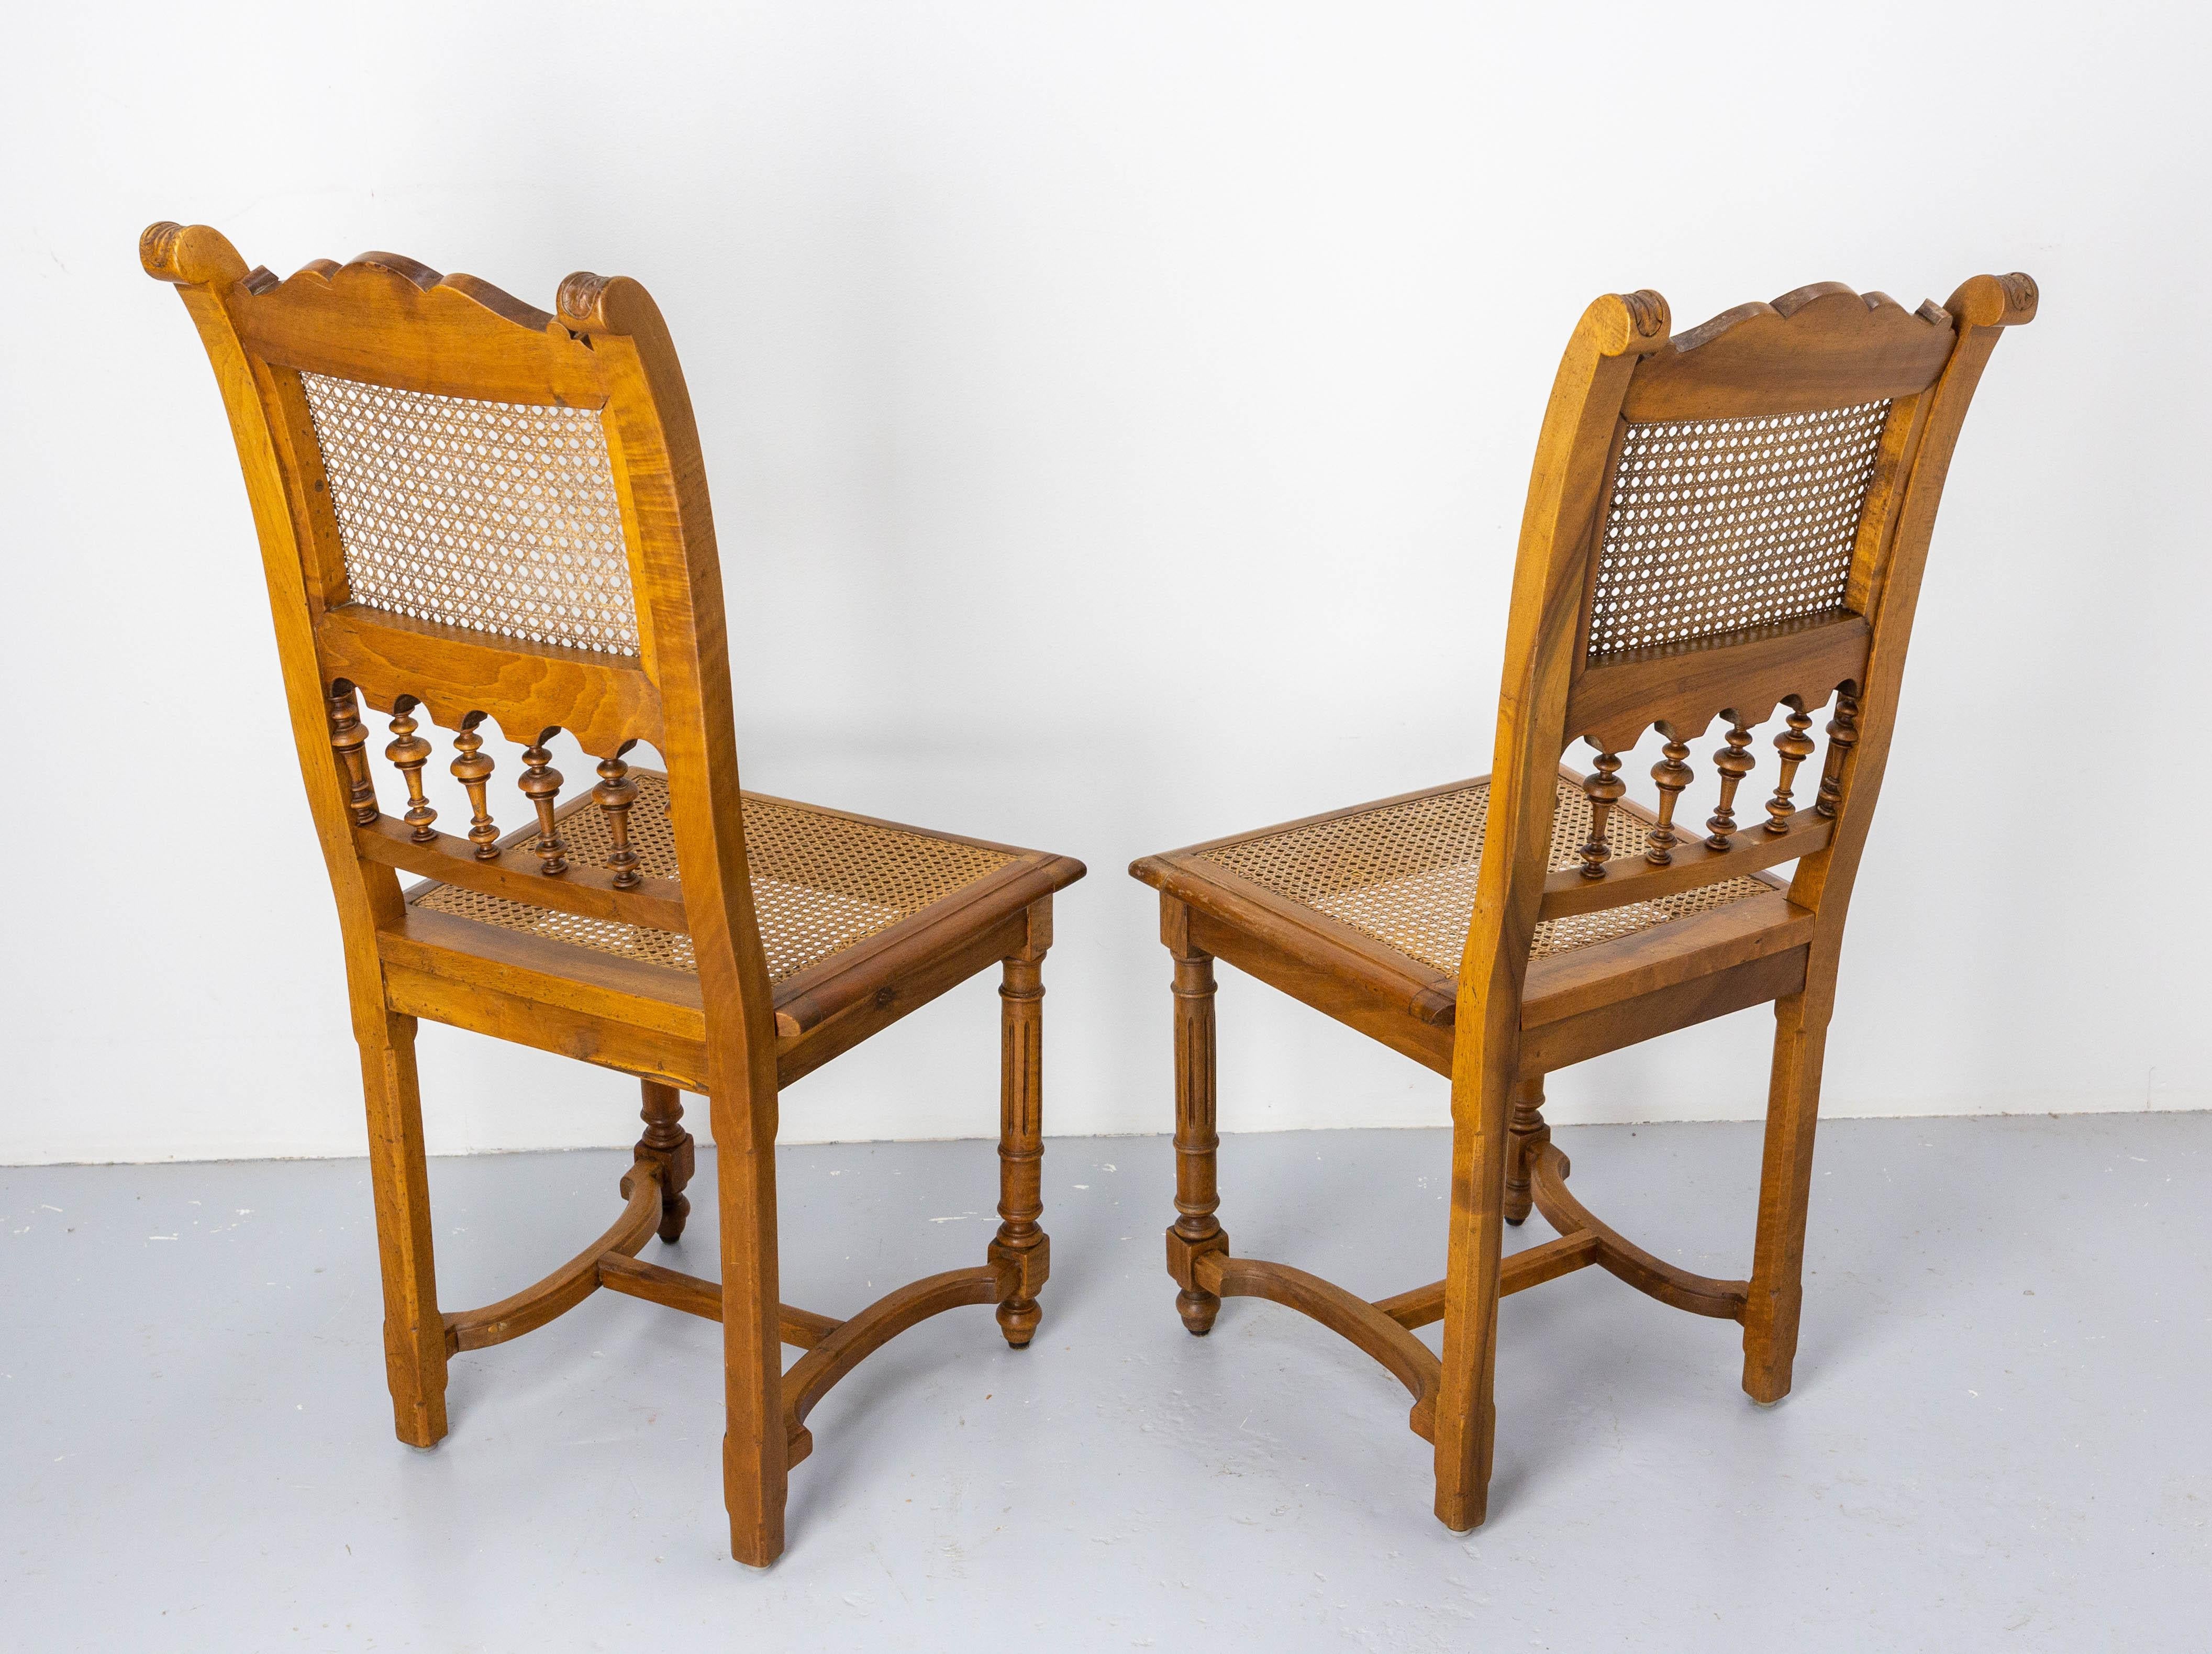 Four Chairs Walnut and Cane in the Louis XIII Style, French, circa 1900 For Sale 2